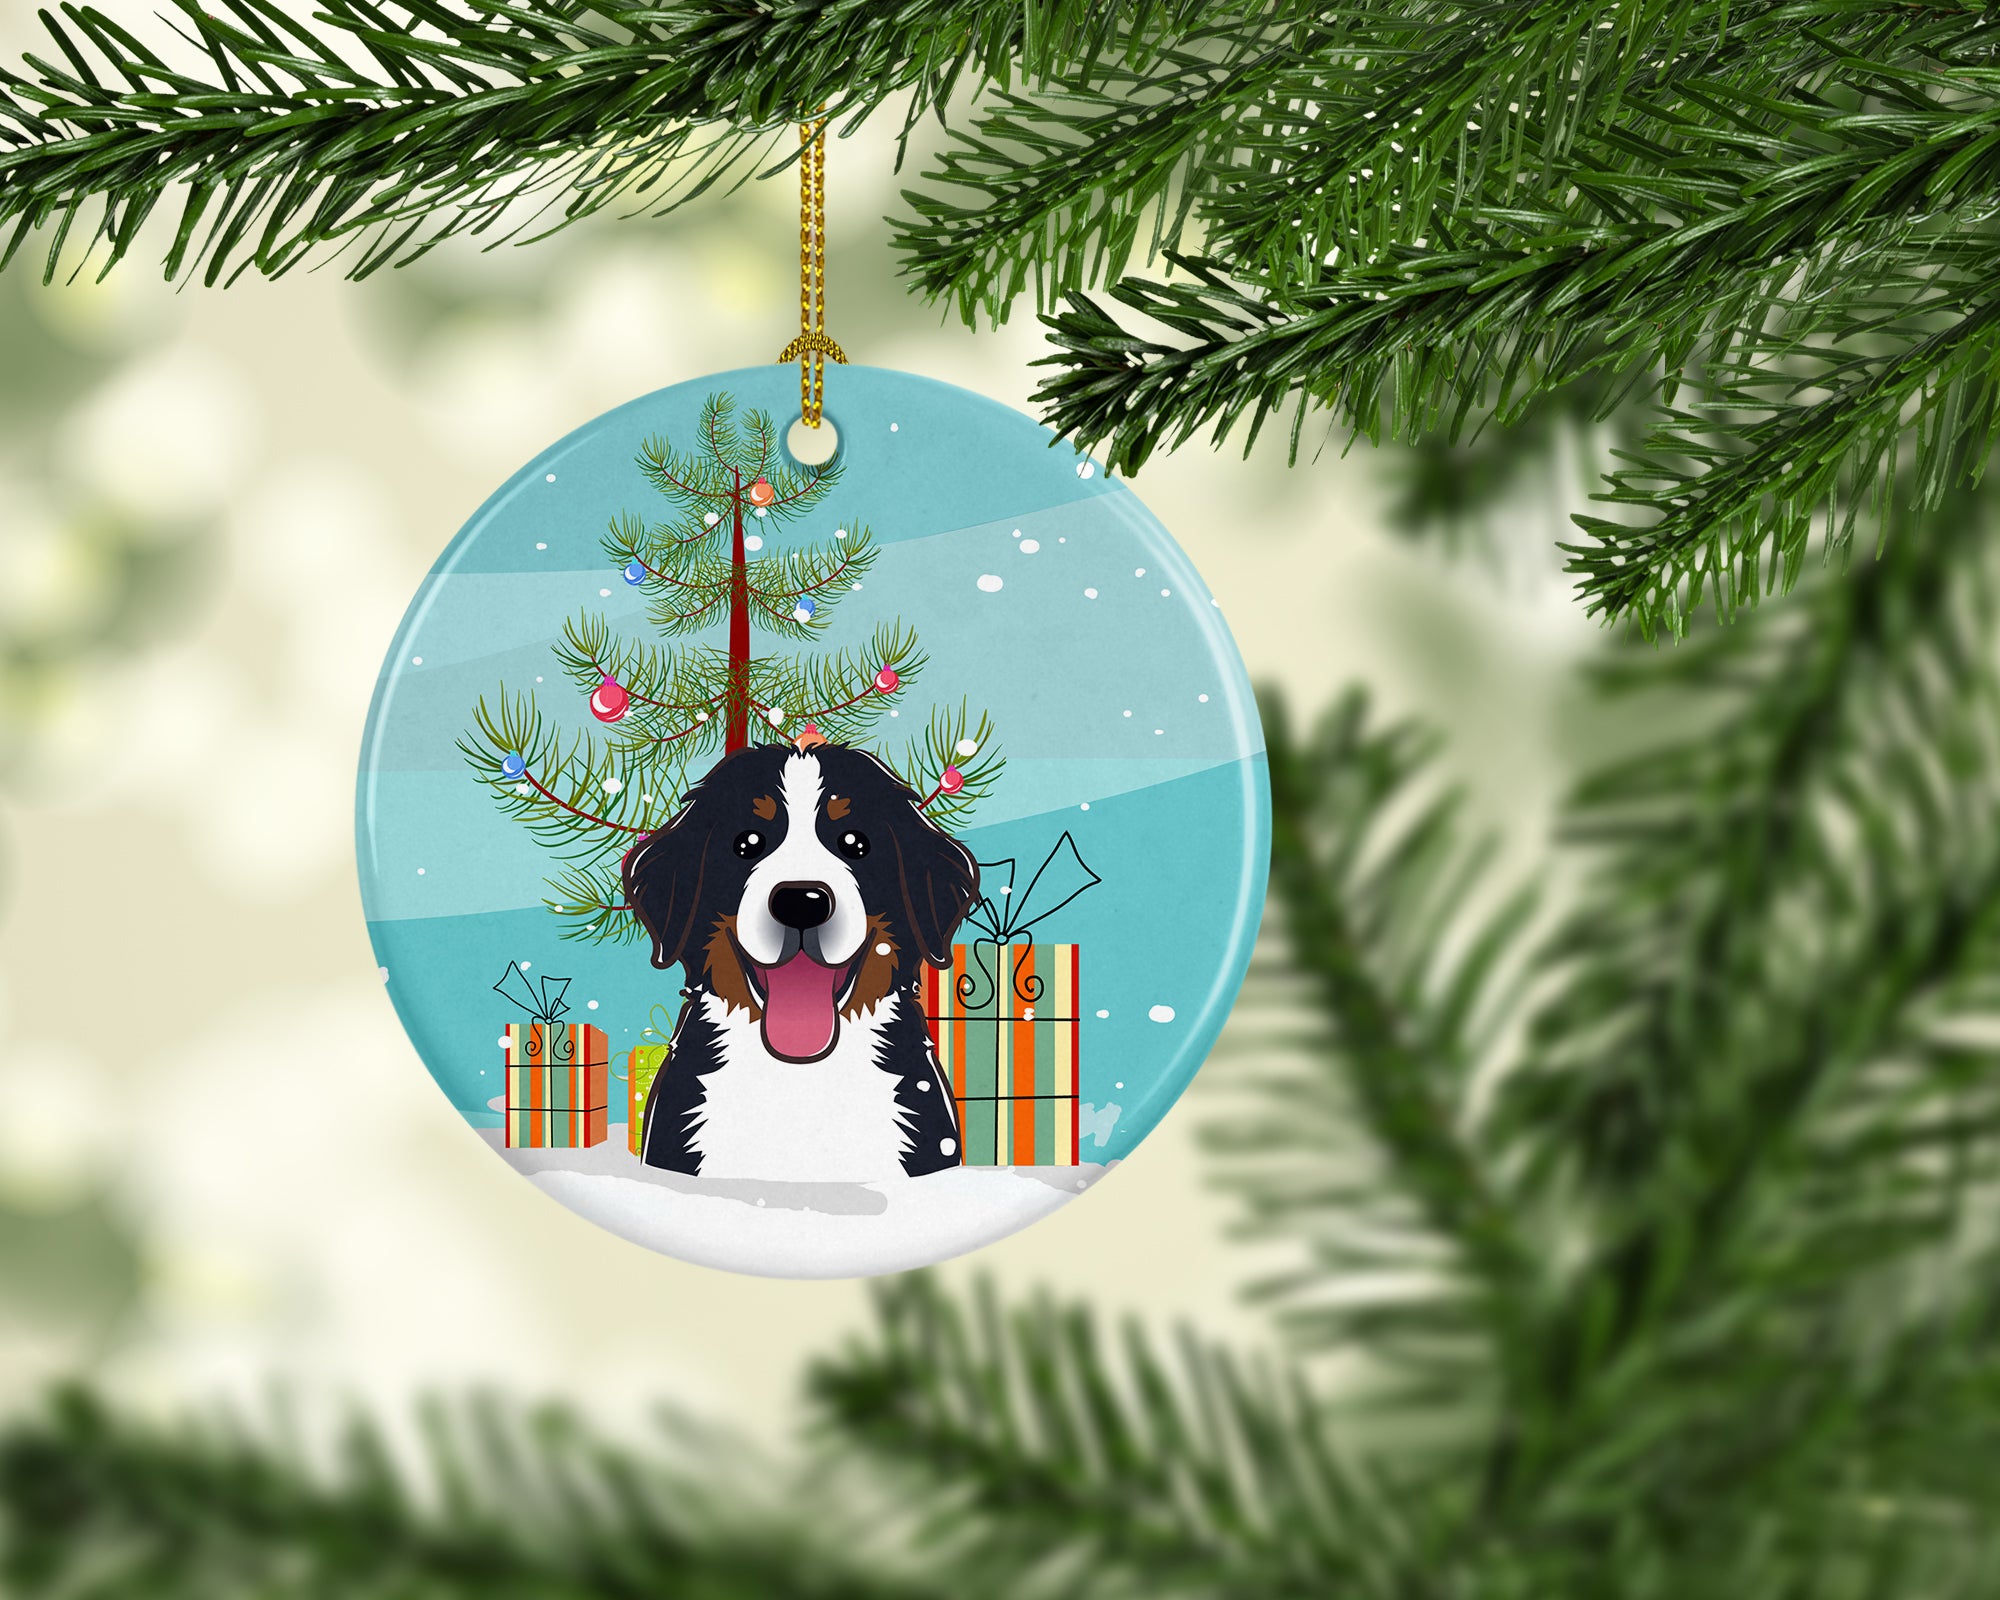 Christmas Tree and Bernese Mountain Dog Ceramic Ornament BB1609CO1 - the-store.com